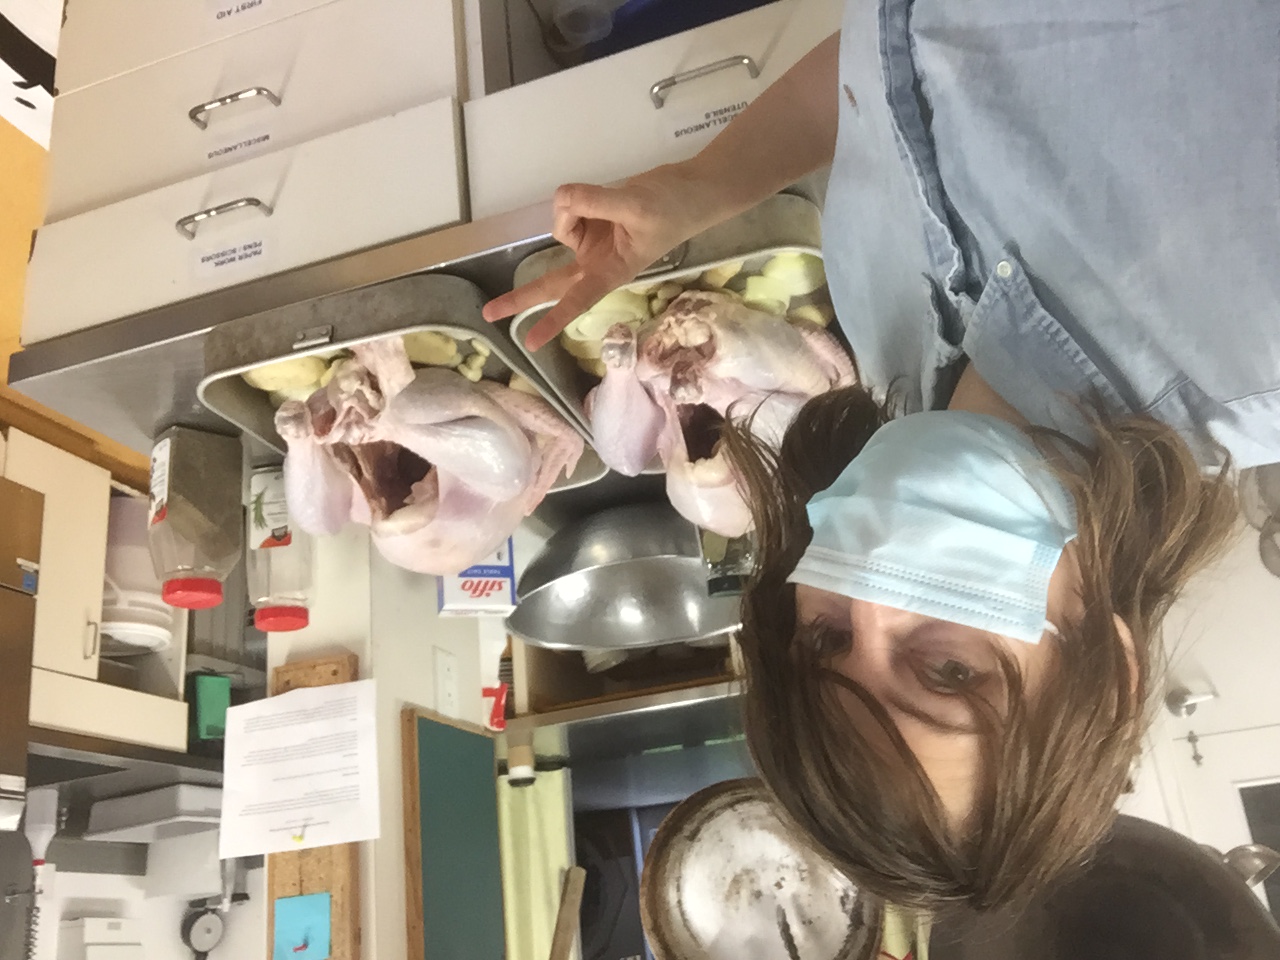 Vivienne posing in front of two full turkeys that have been seasoned prepped with fruit underneath.